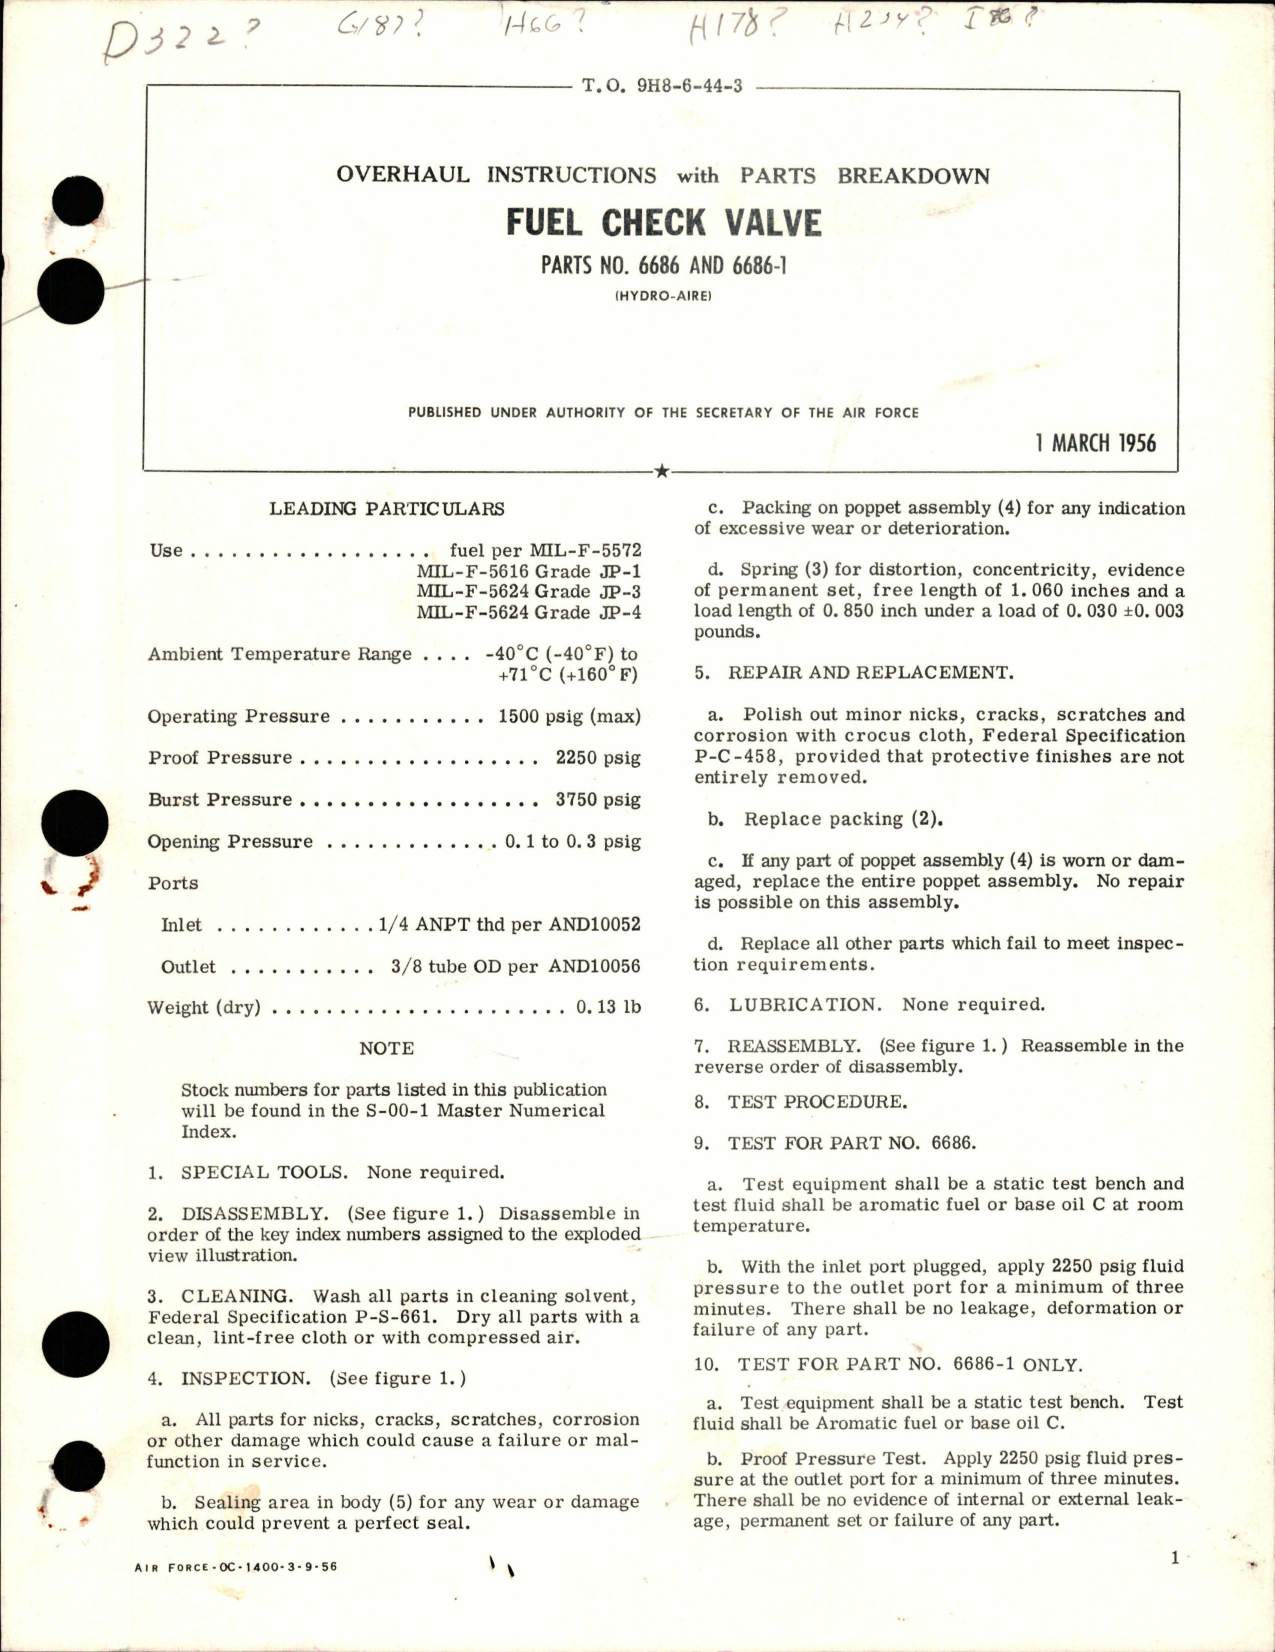 Sample page 1 from AirCorps Library document: Overhaul Instructions with Parts Breakdown for Fuel Check Valve - Parts 6686, 6686-1